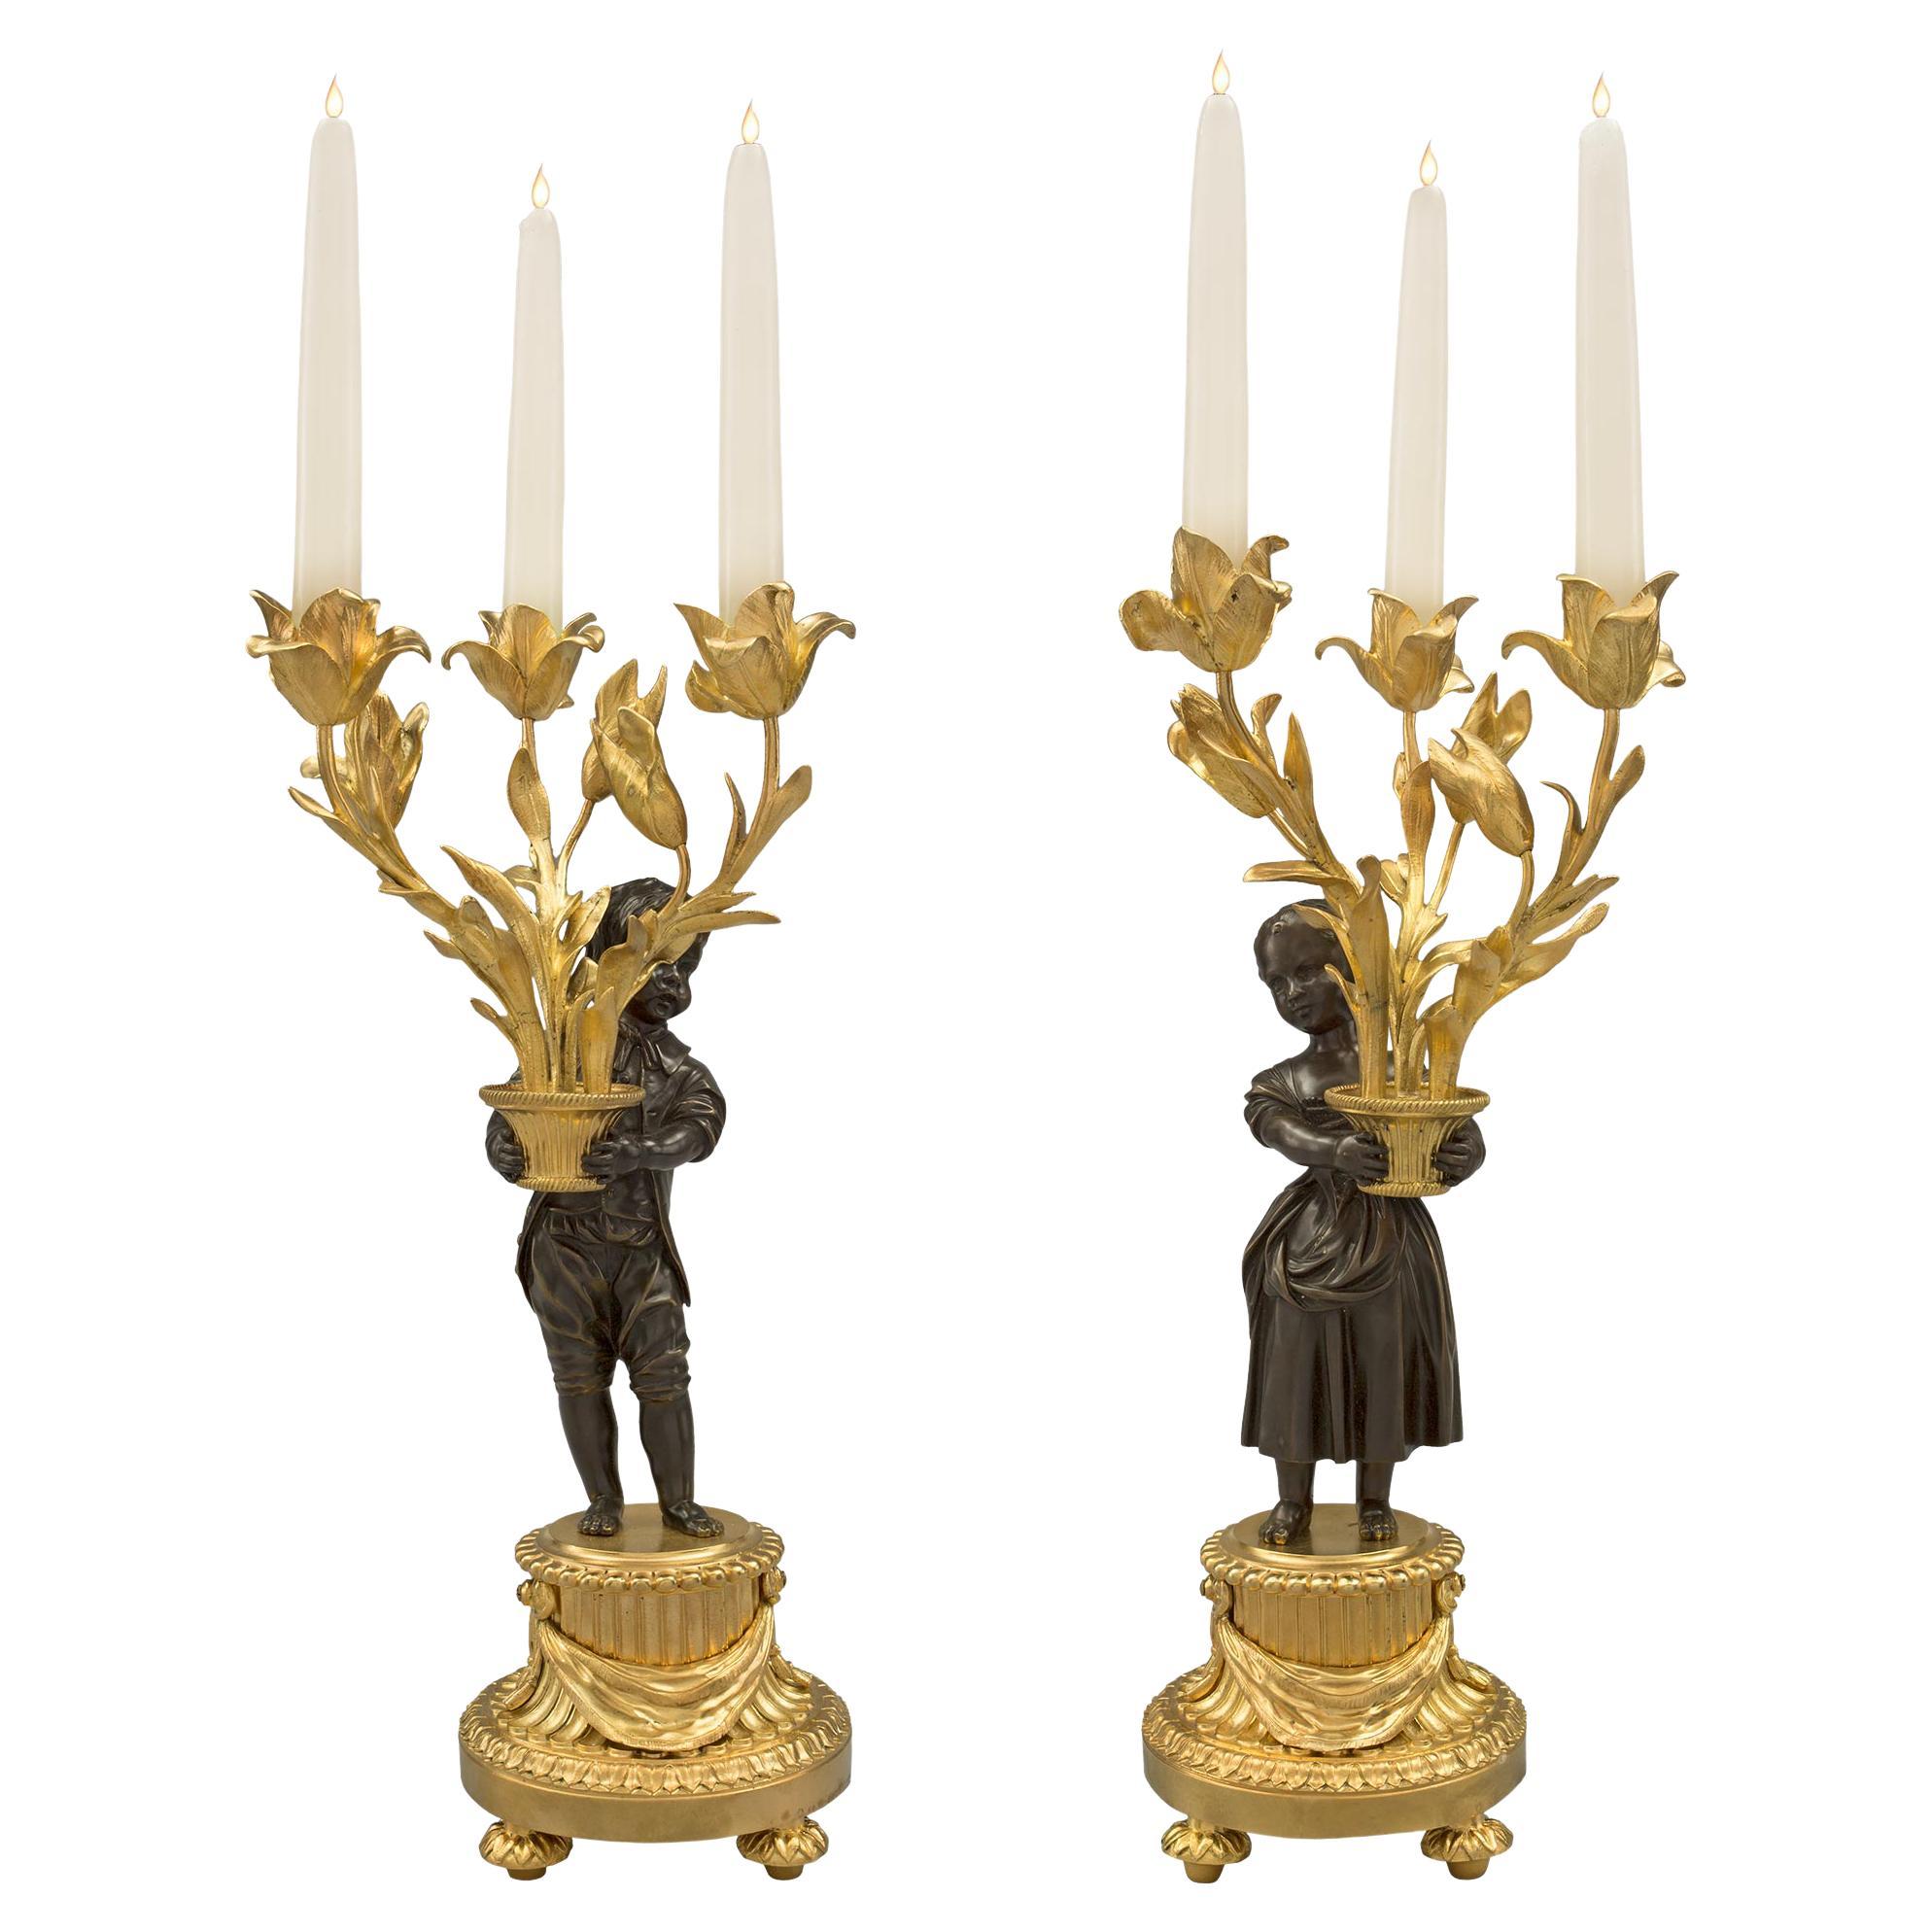 Pair of French 19th Century Louis XVI Style Three-Arm Candelabras For Sale